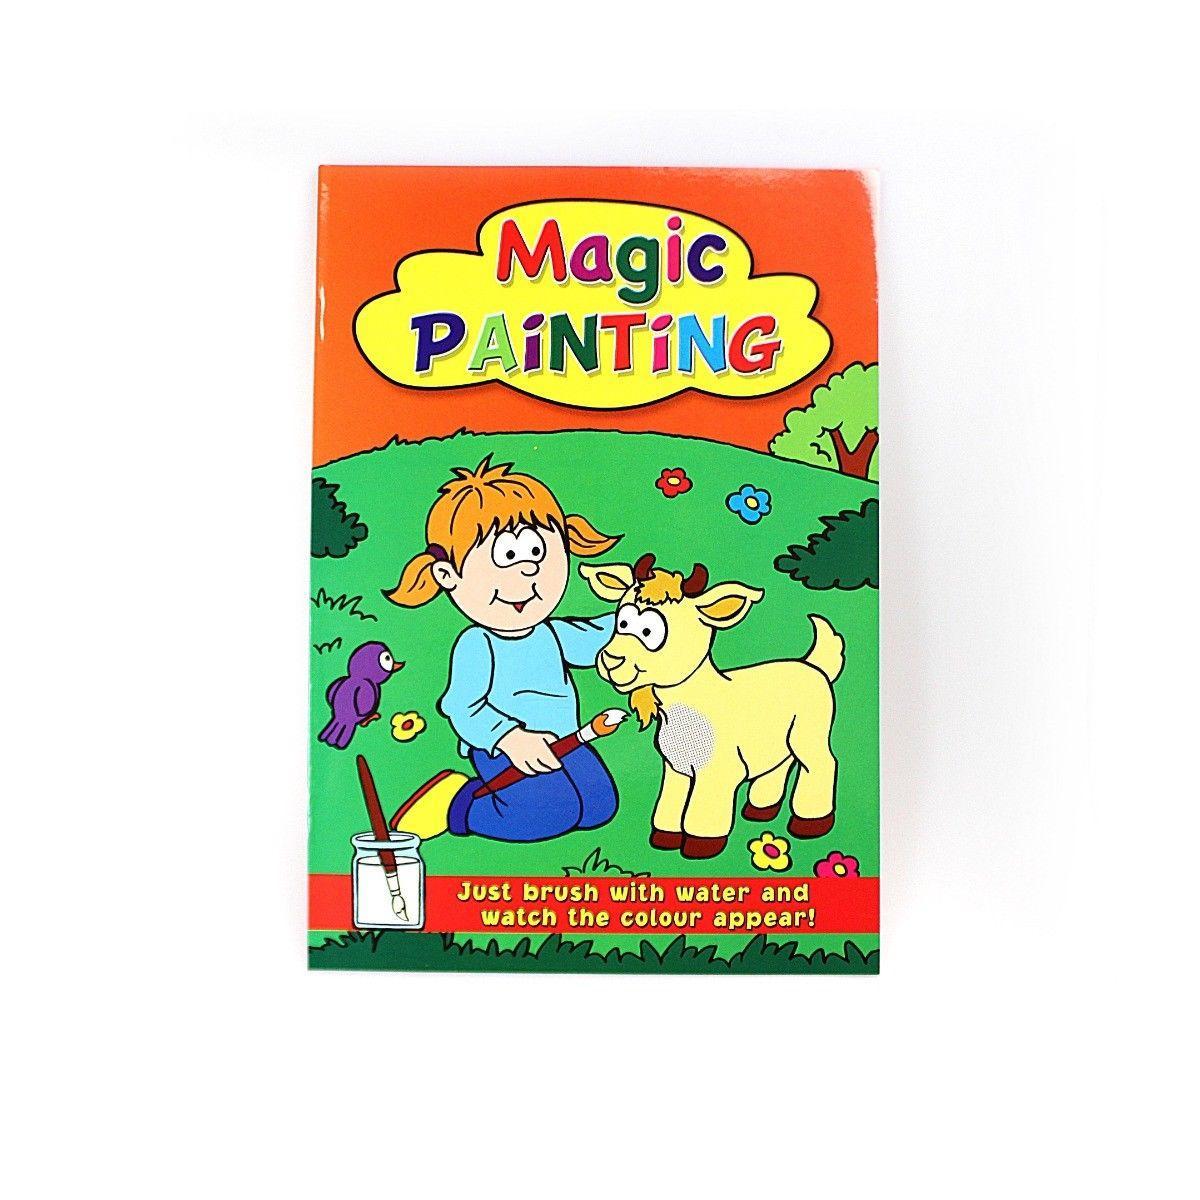 Children's Craft Magic Painting Book 1 & 2 A4 Size P2165 A  (Large Letter Rate)